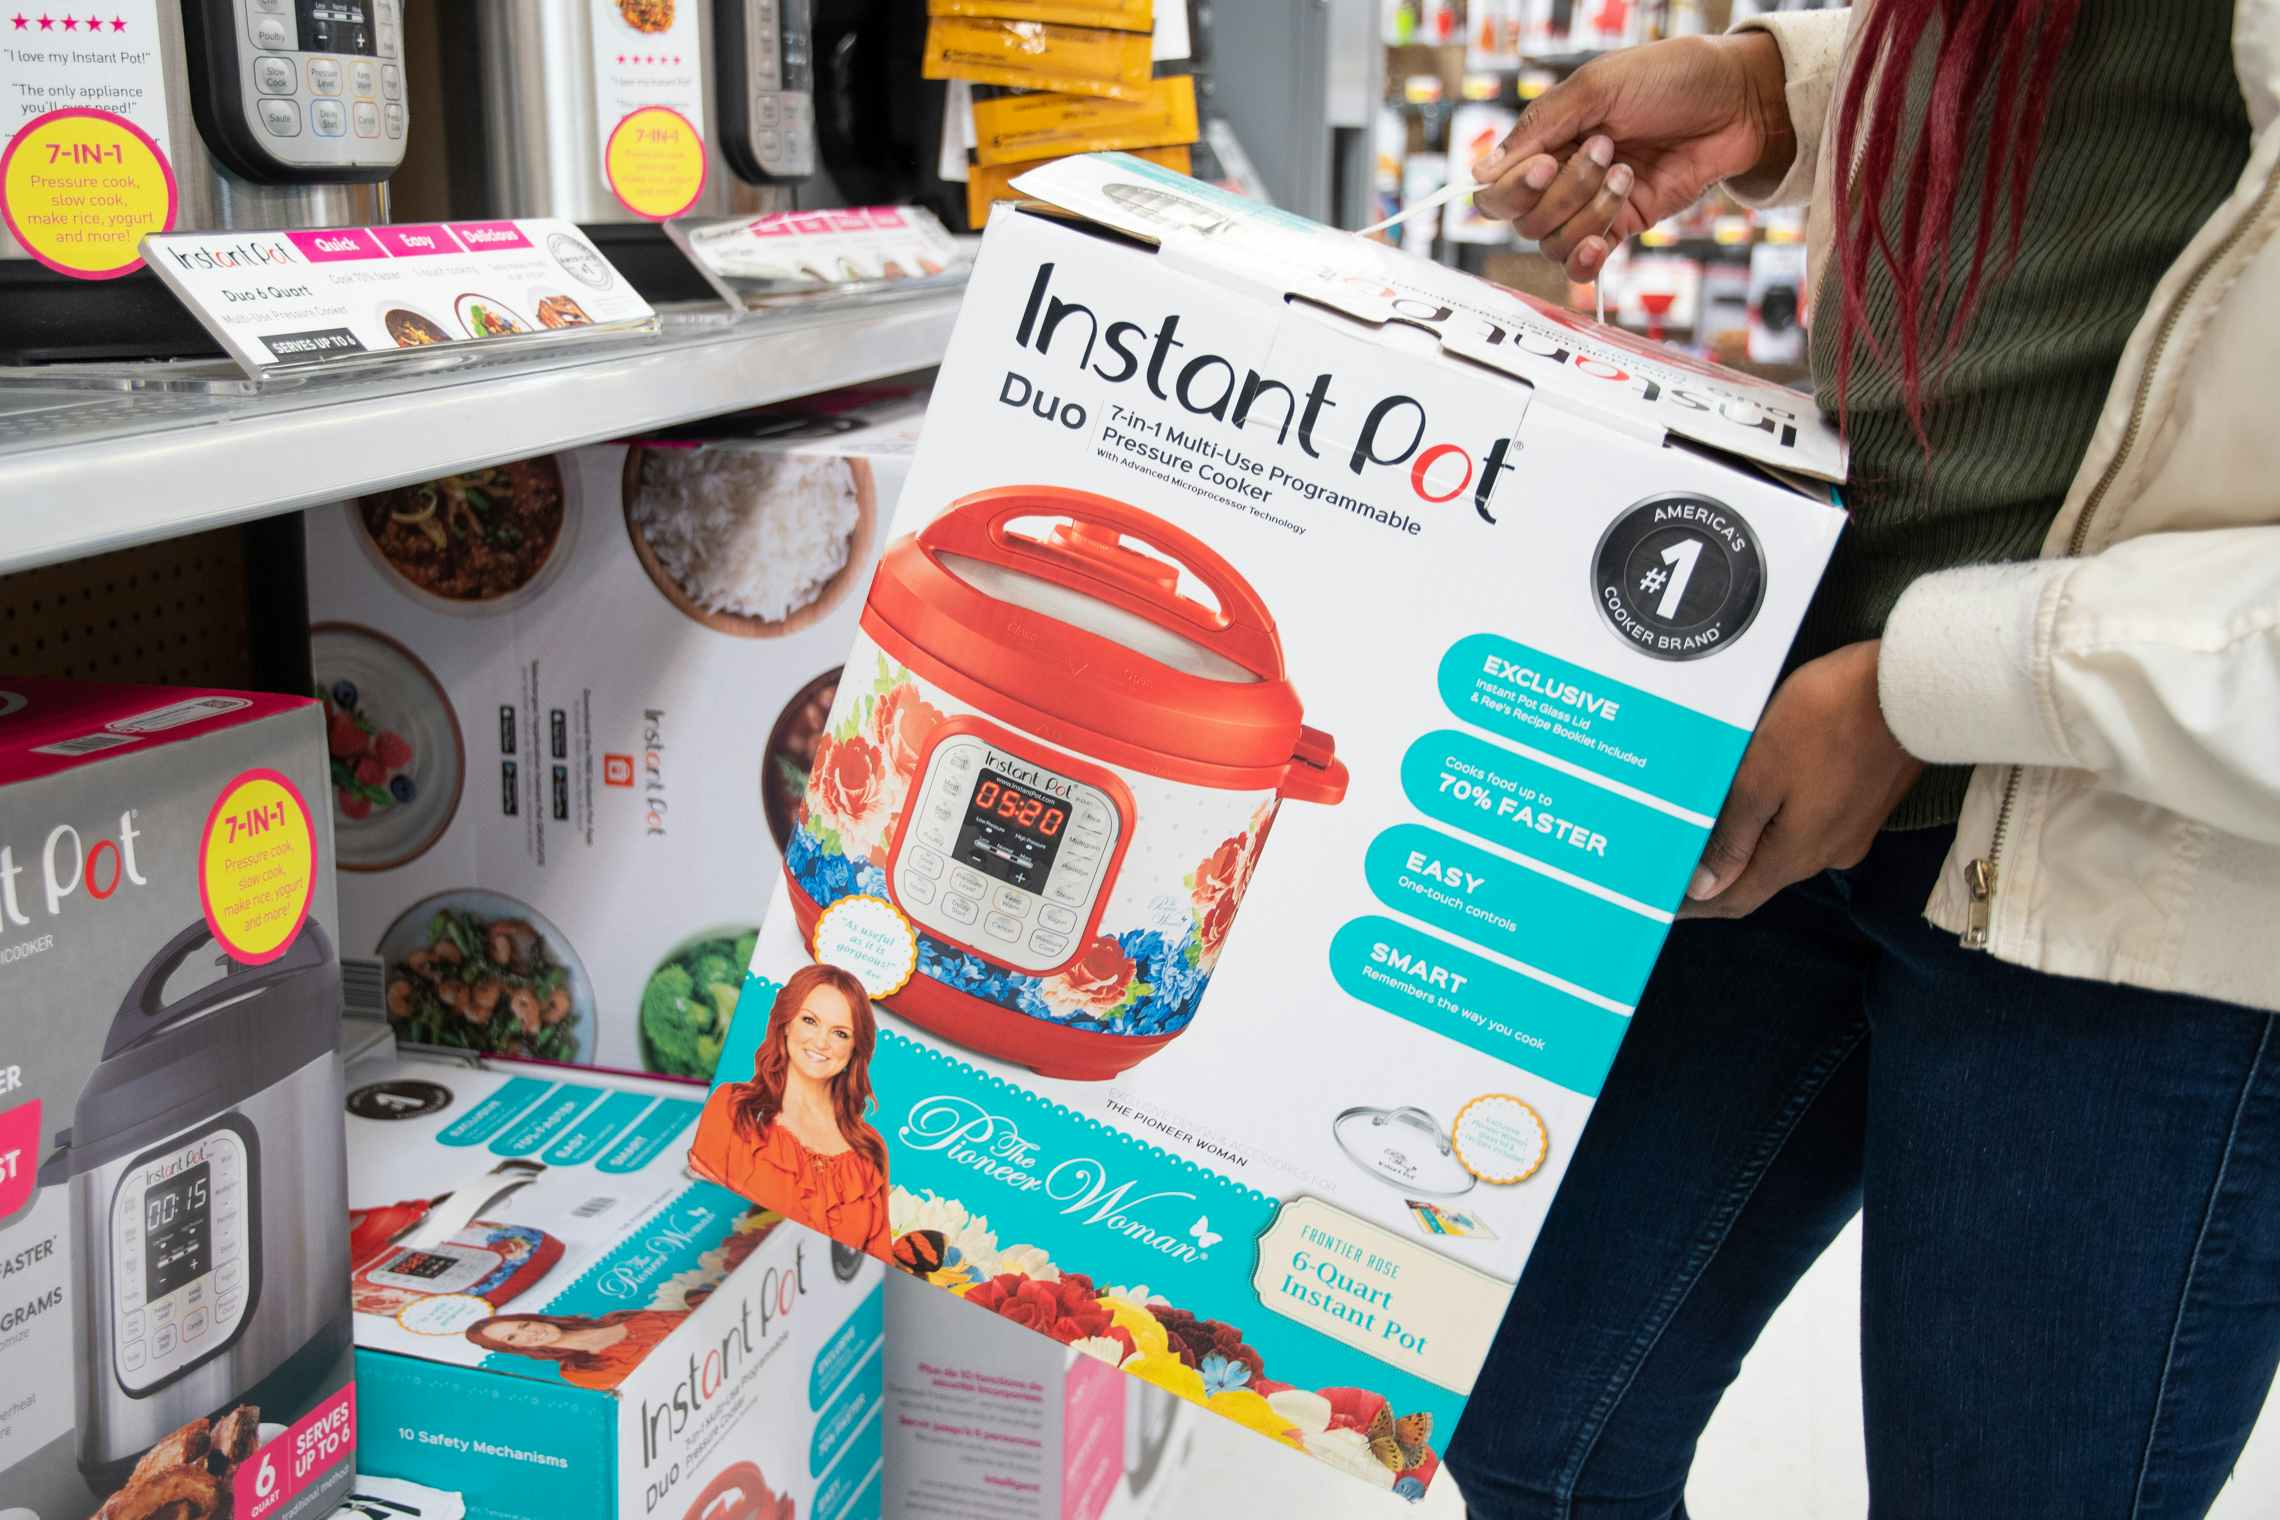 Prime Day 2020: Get the 6-in-1 Instant Pot for half off at Walmart